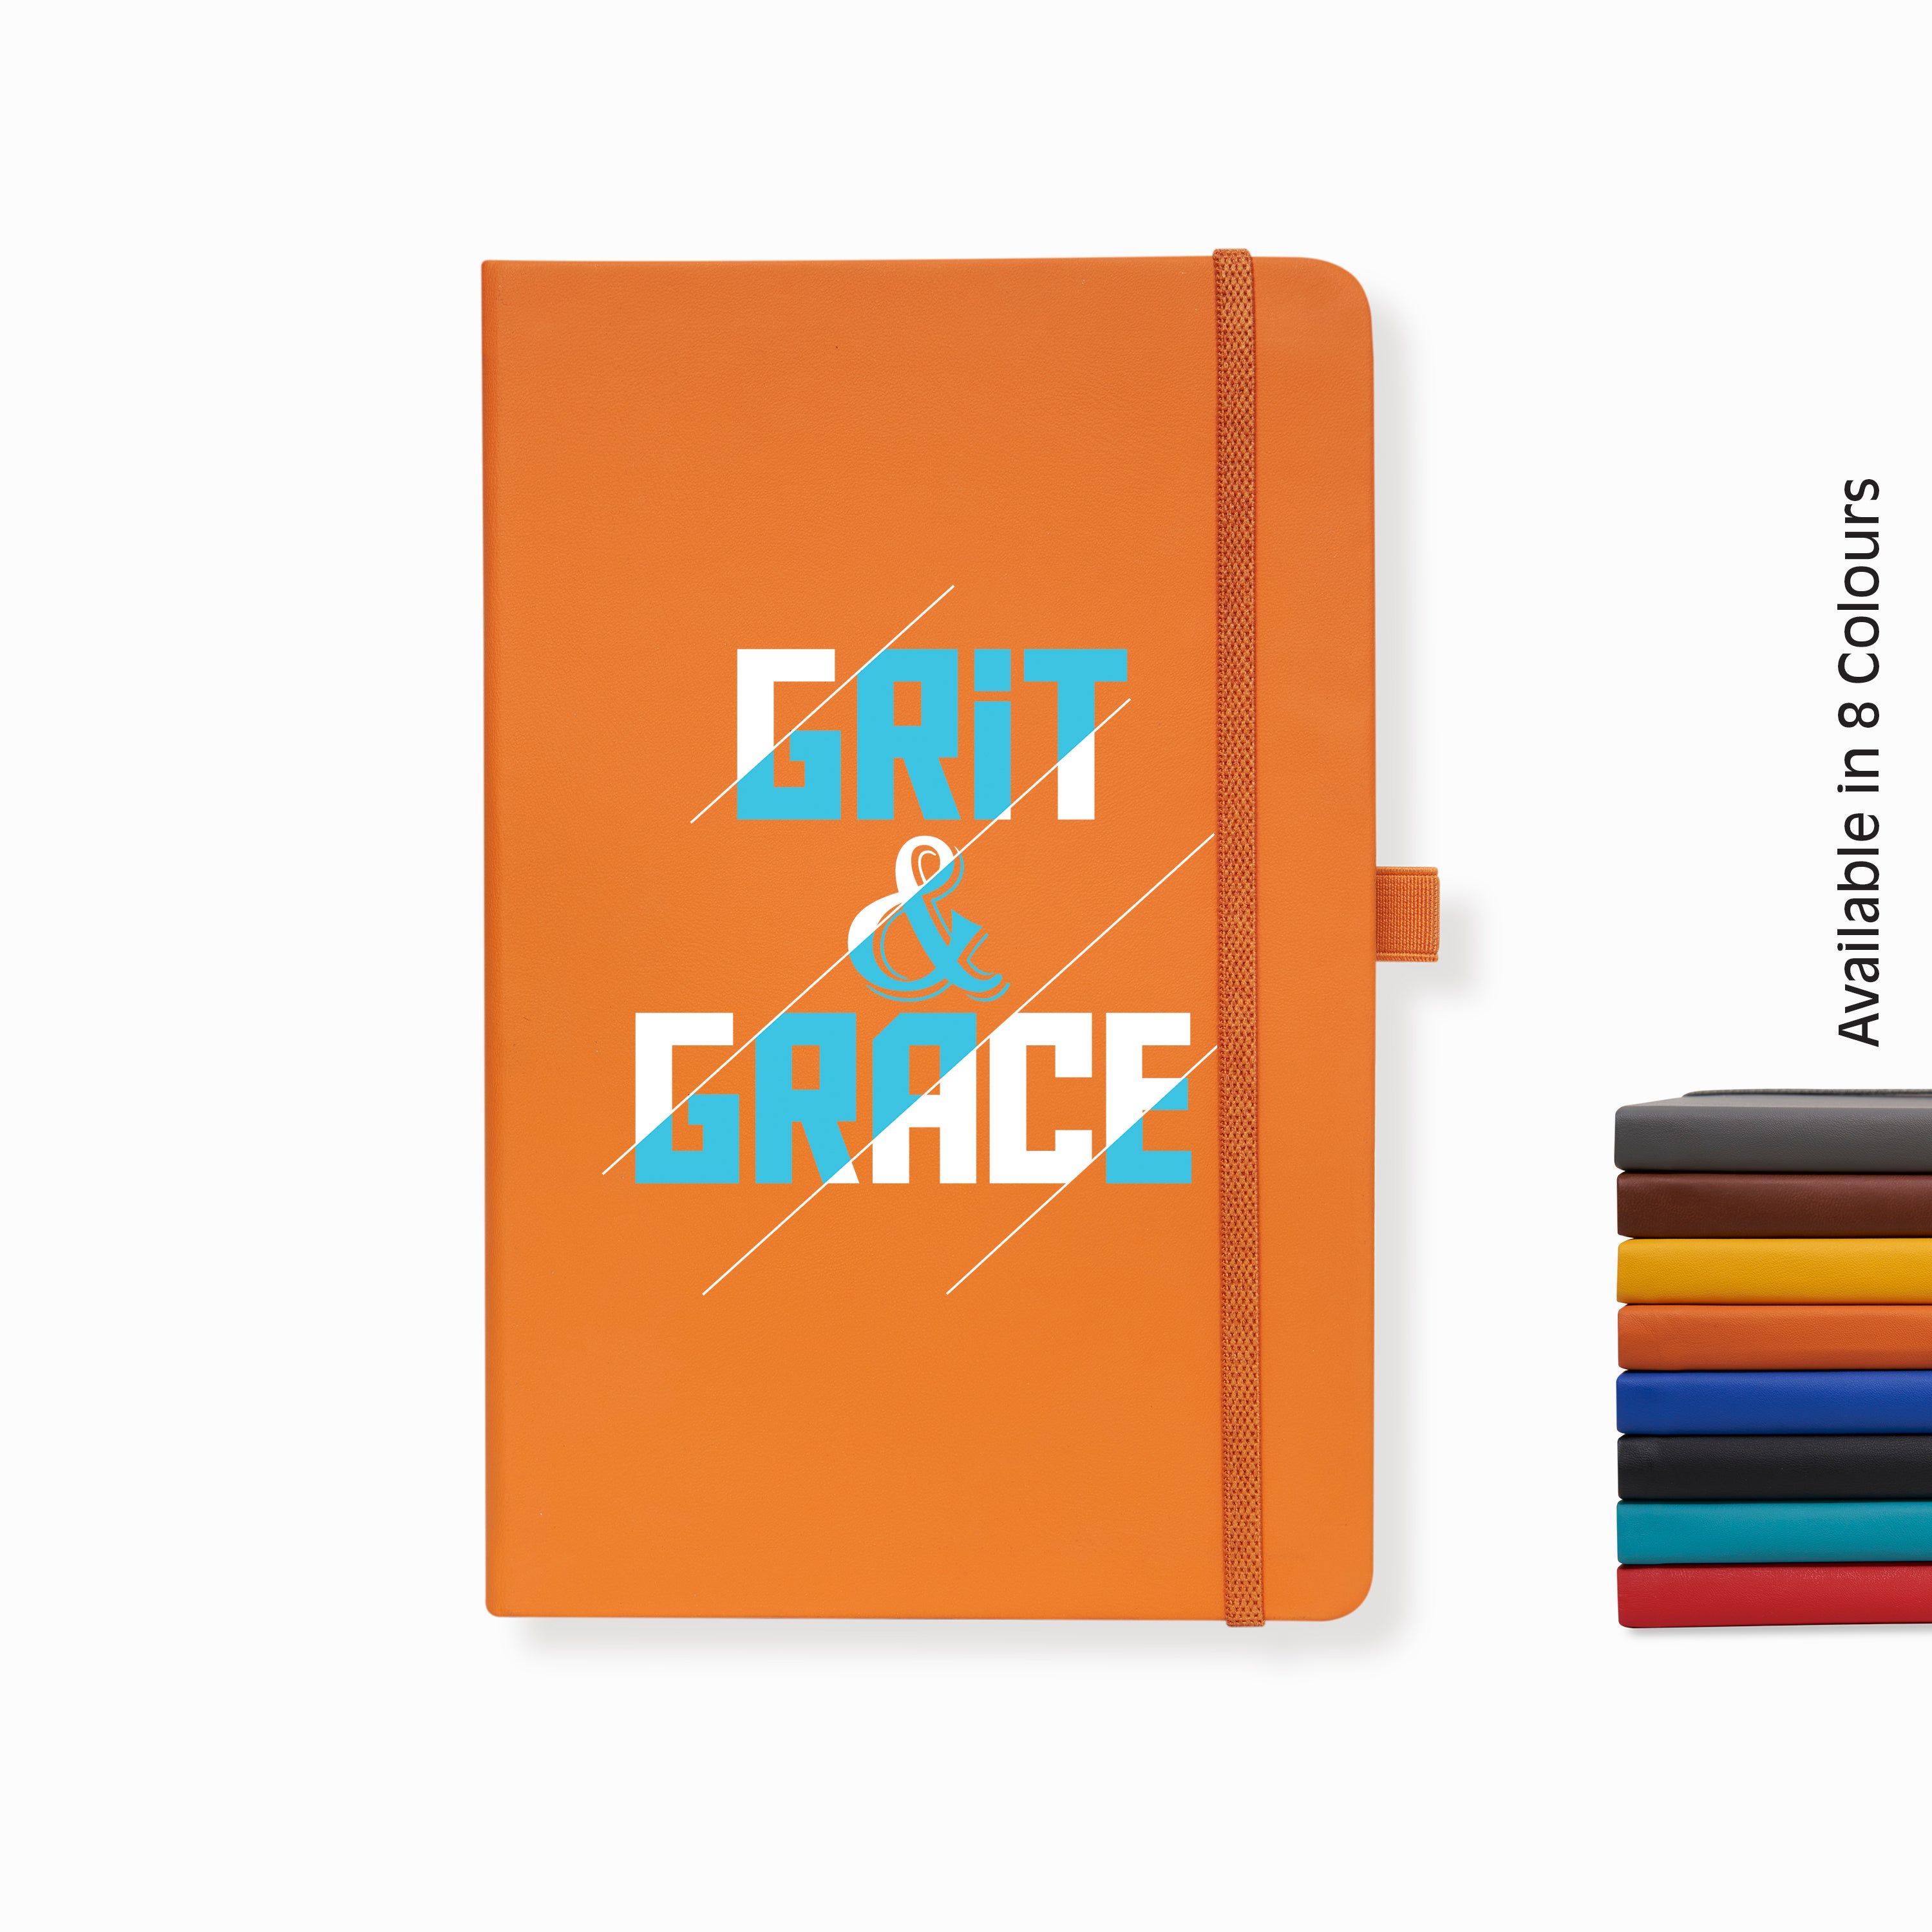 Pro Series Executive A5 PU Leather Hardbound Ruled Orange Notebook with Pen Loop [Grit & Grace]